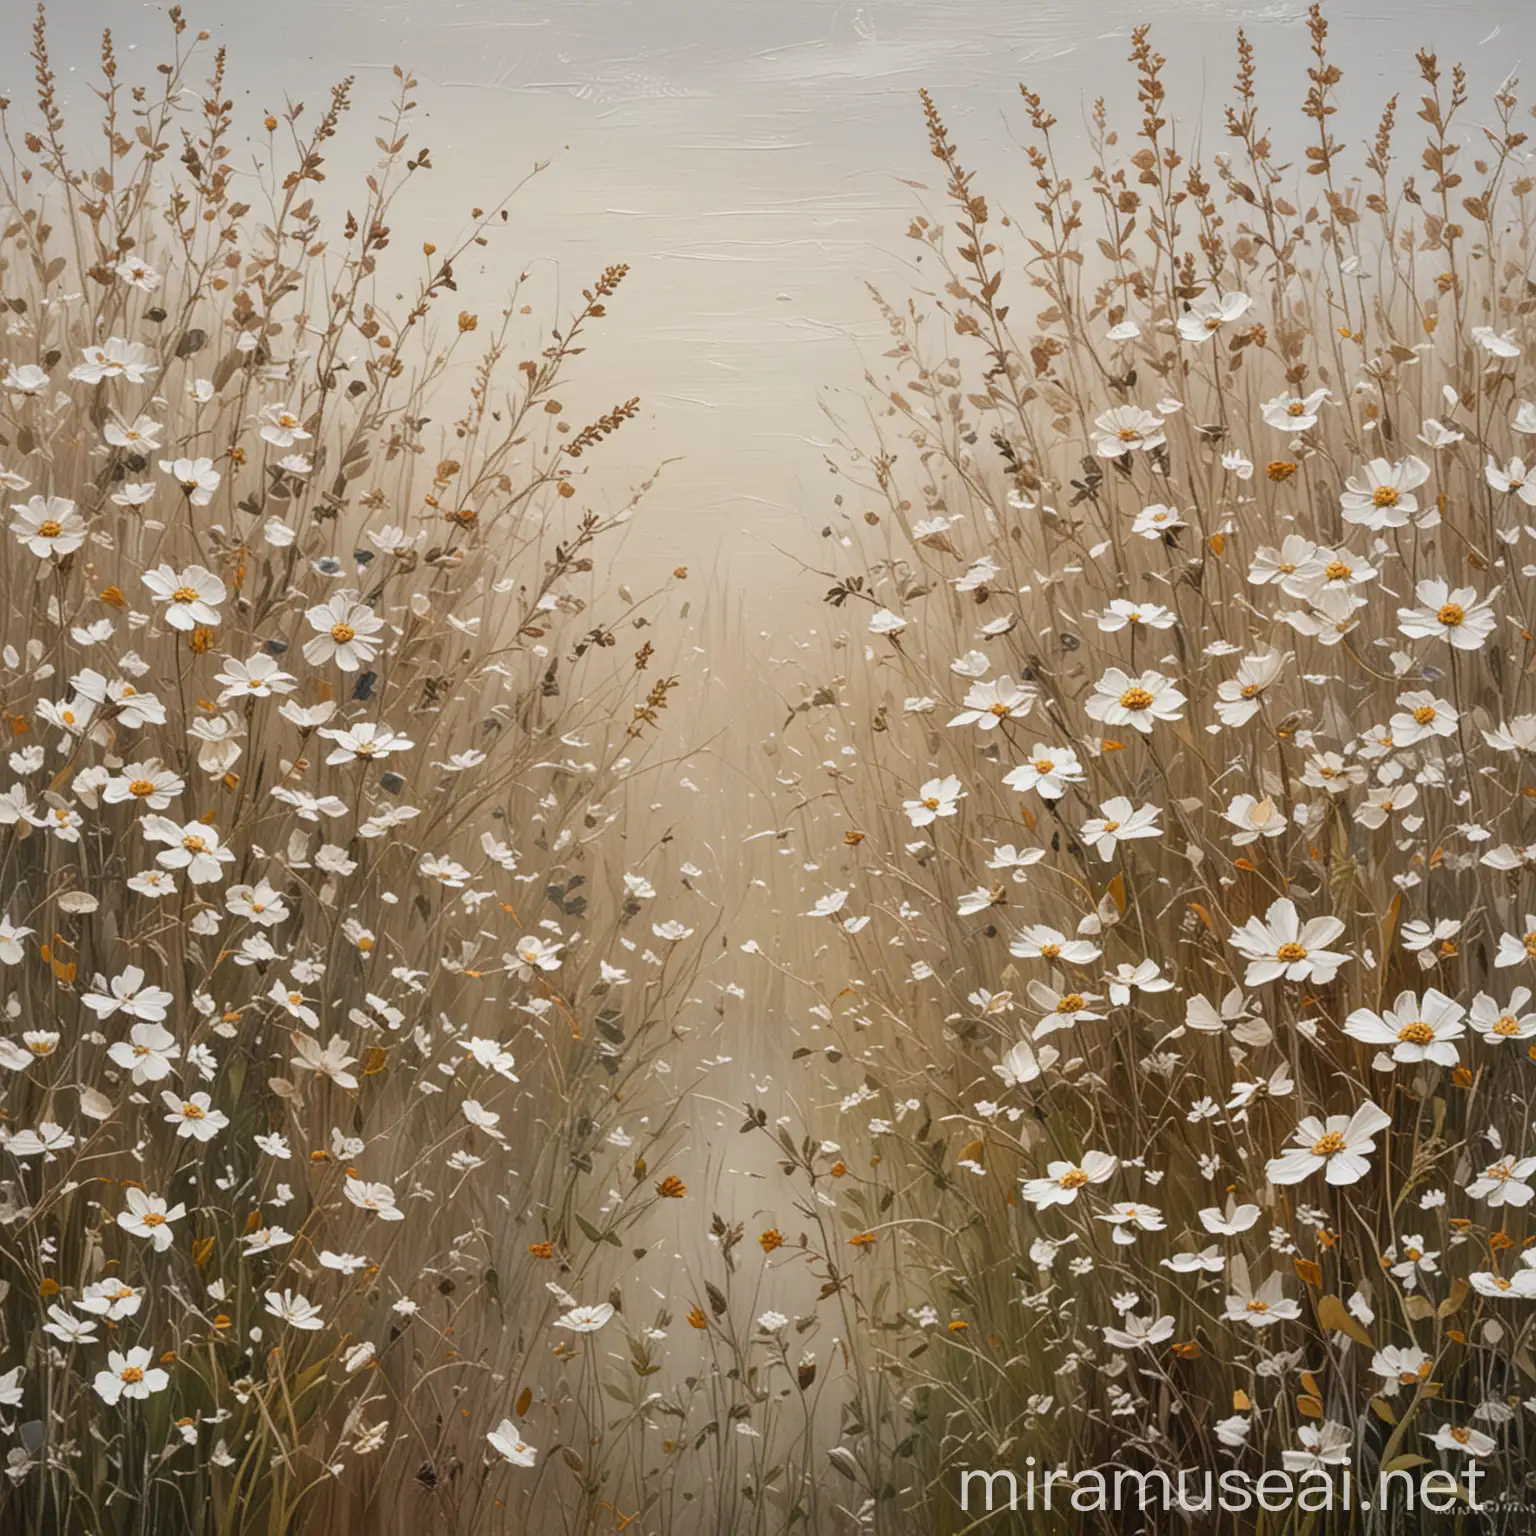 Intricate Textured Neutral Wildflower Meadow Painting